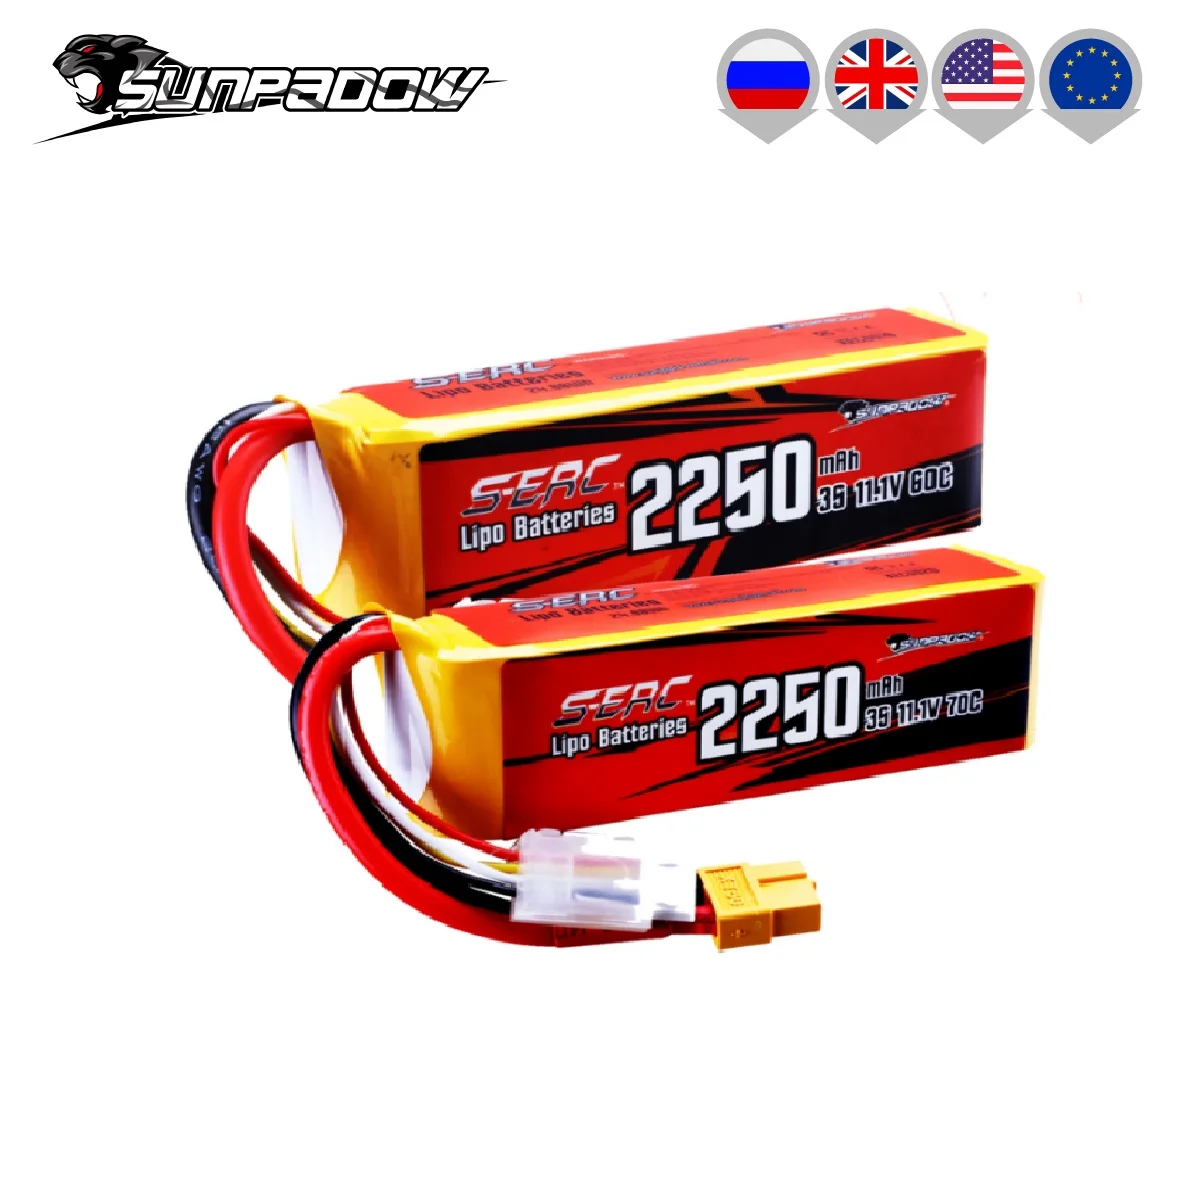 2pcs SUNPADOW 11.1V 3S RC Lipo Battery 60C 70C 2250mAh with XT60 Plug for RC Airplane Quadcopter Helicopter Drone FPV Boat